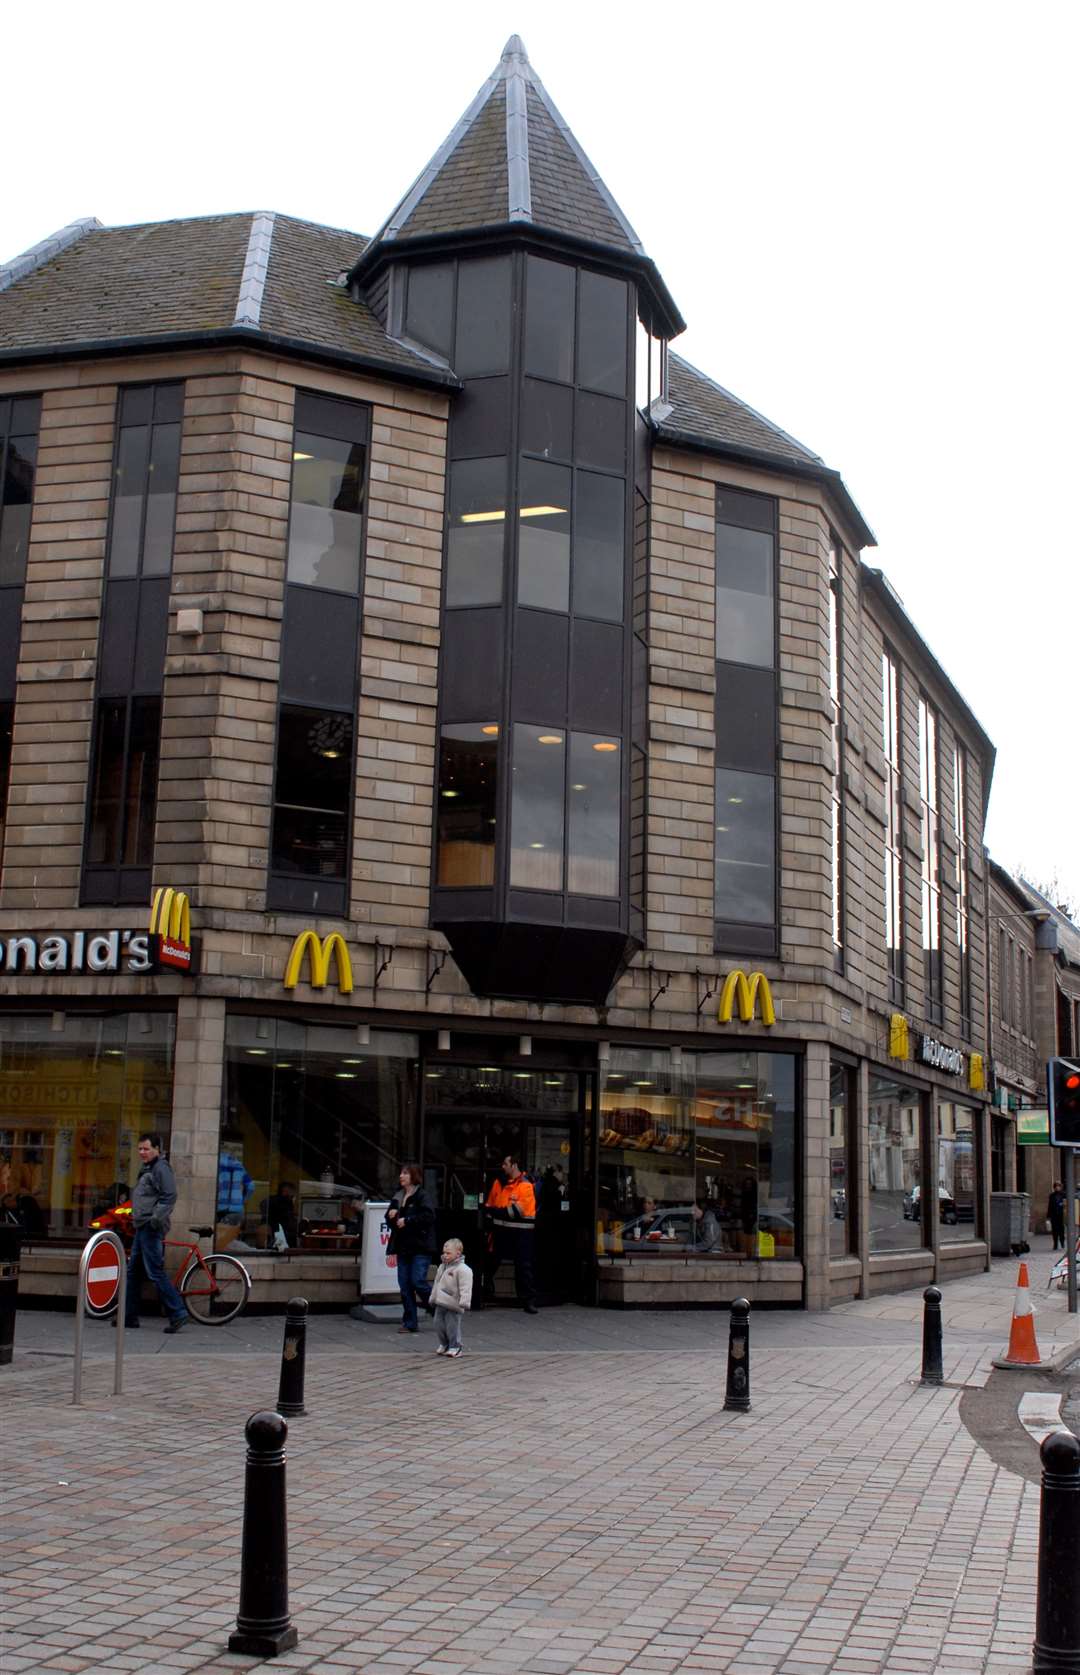 McDonald's outlets will still serve meals to takeaway but the firm said it was halting sit down service at all UK sites.